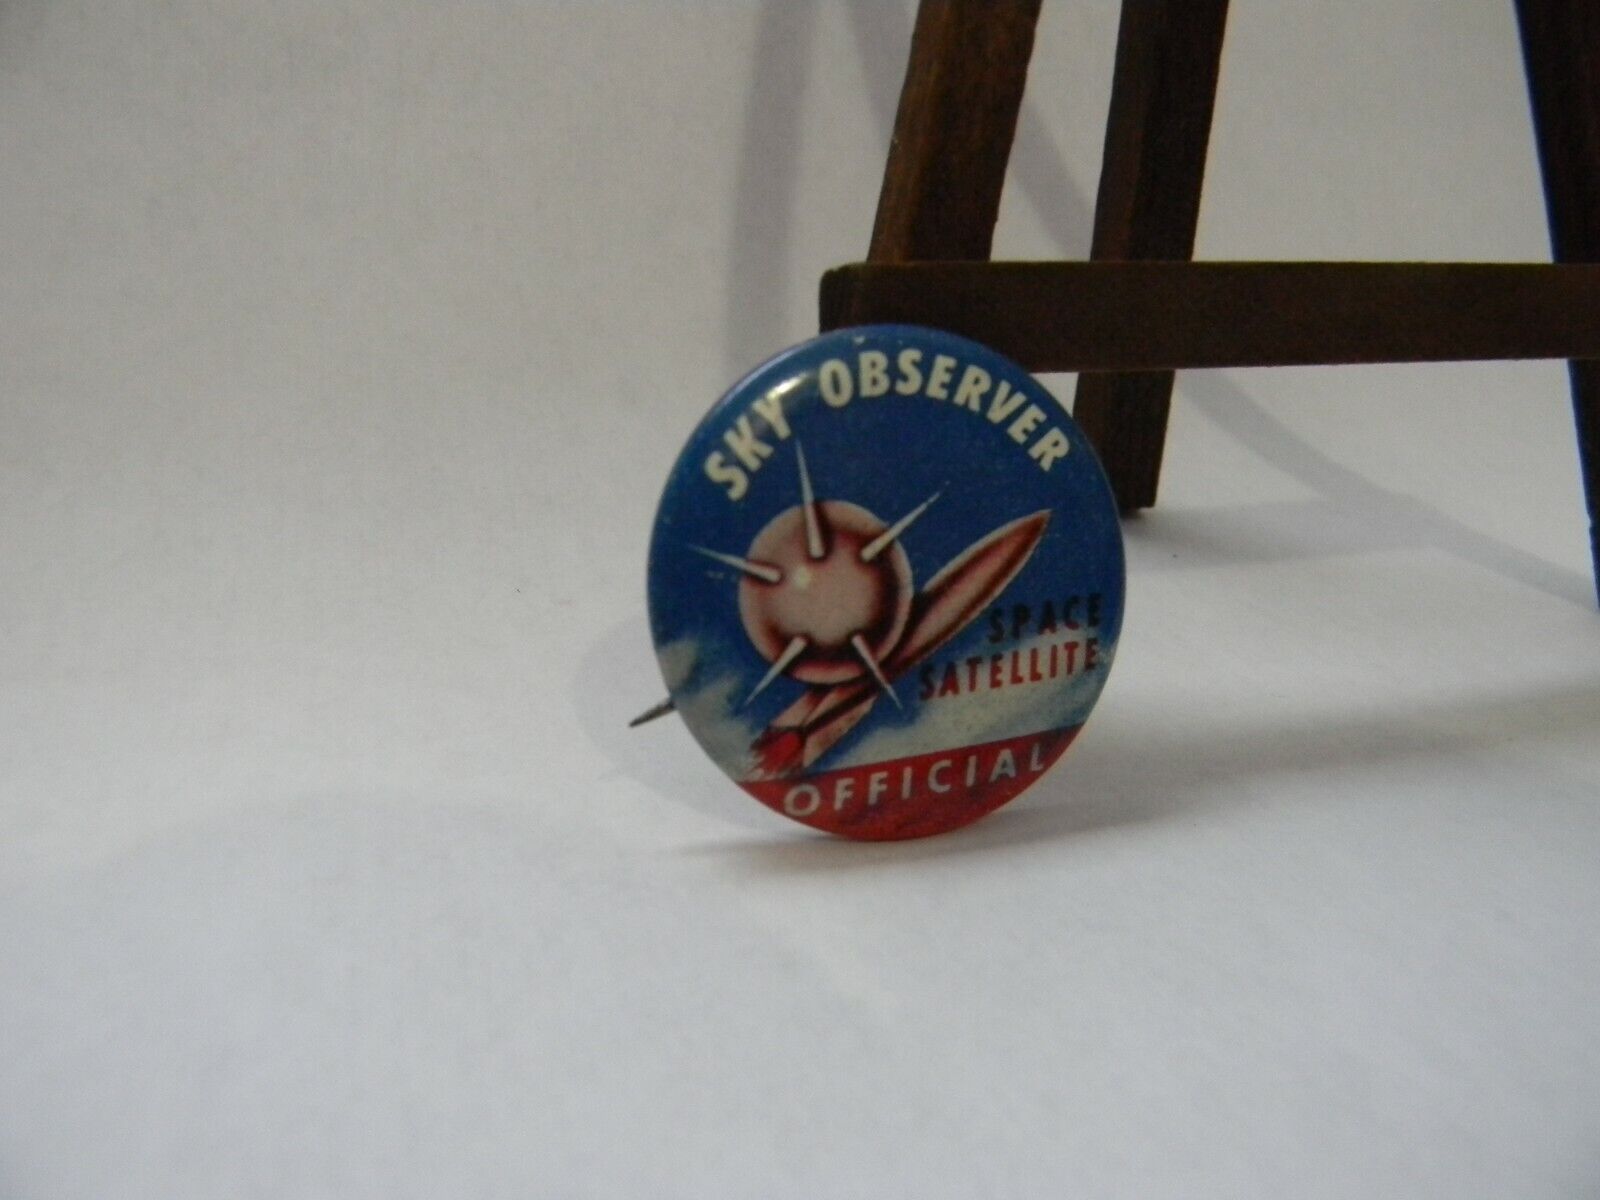 Vintage Sky Observer Button NM condition